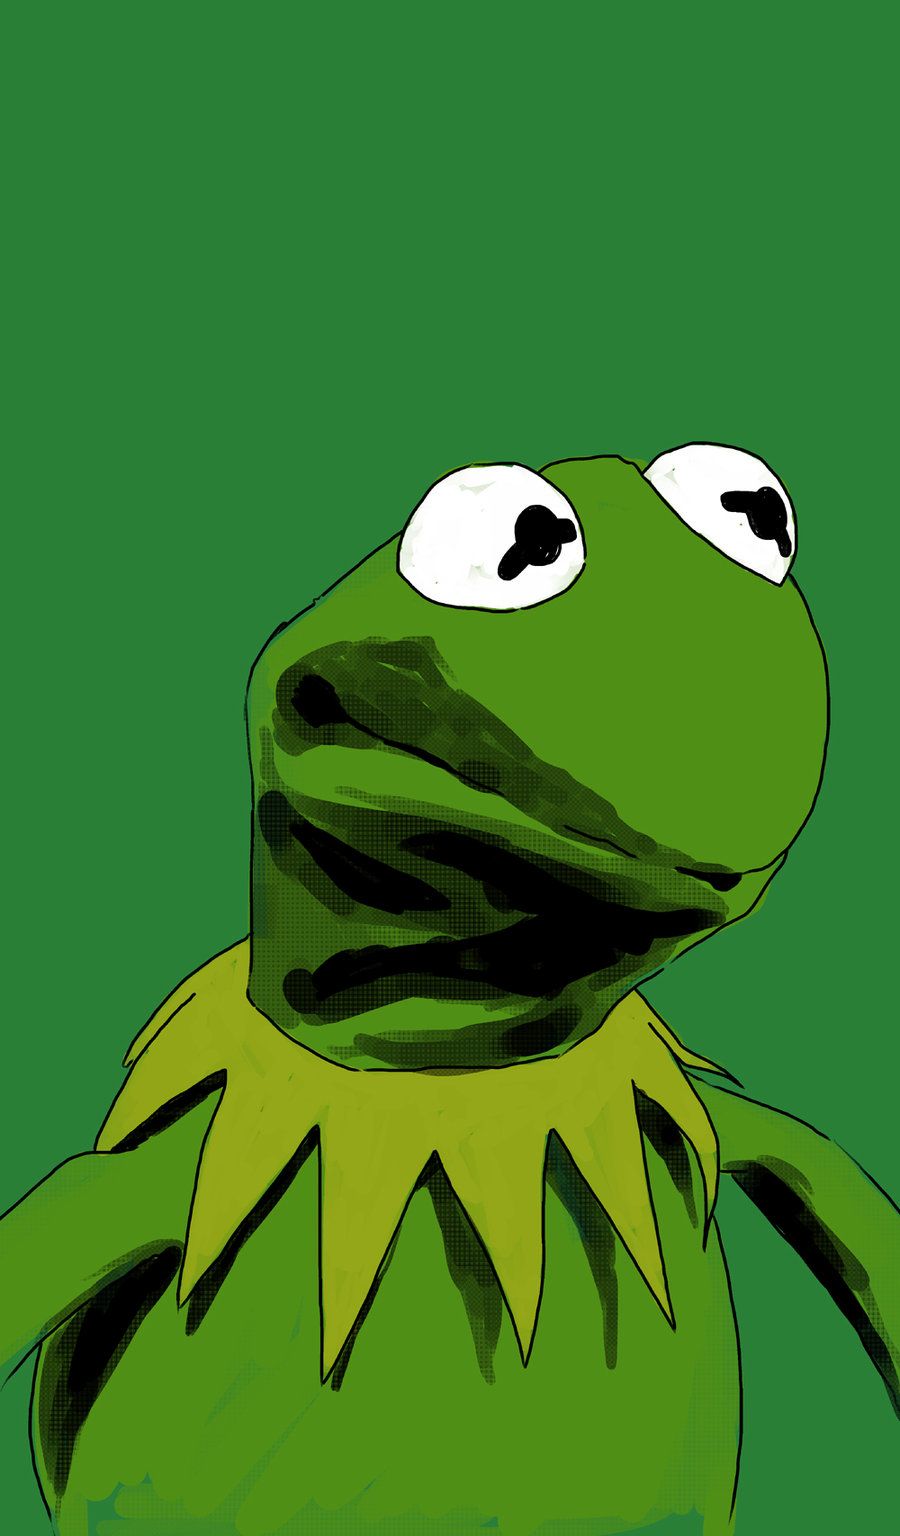 Angry Kermit Frog drawing free image download